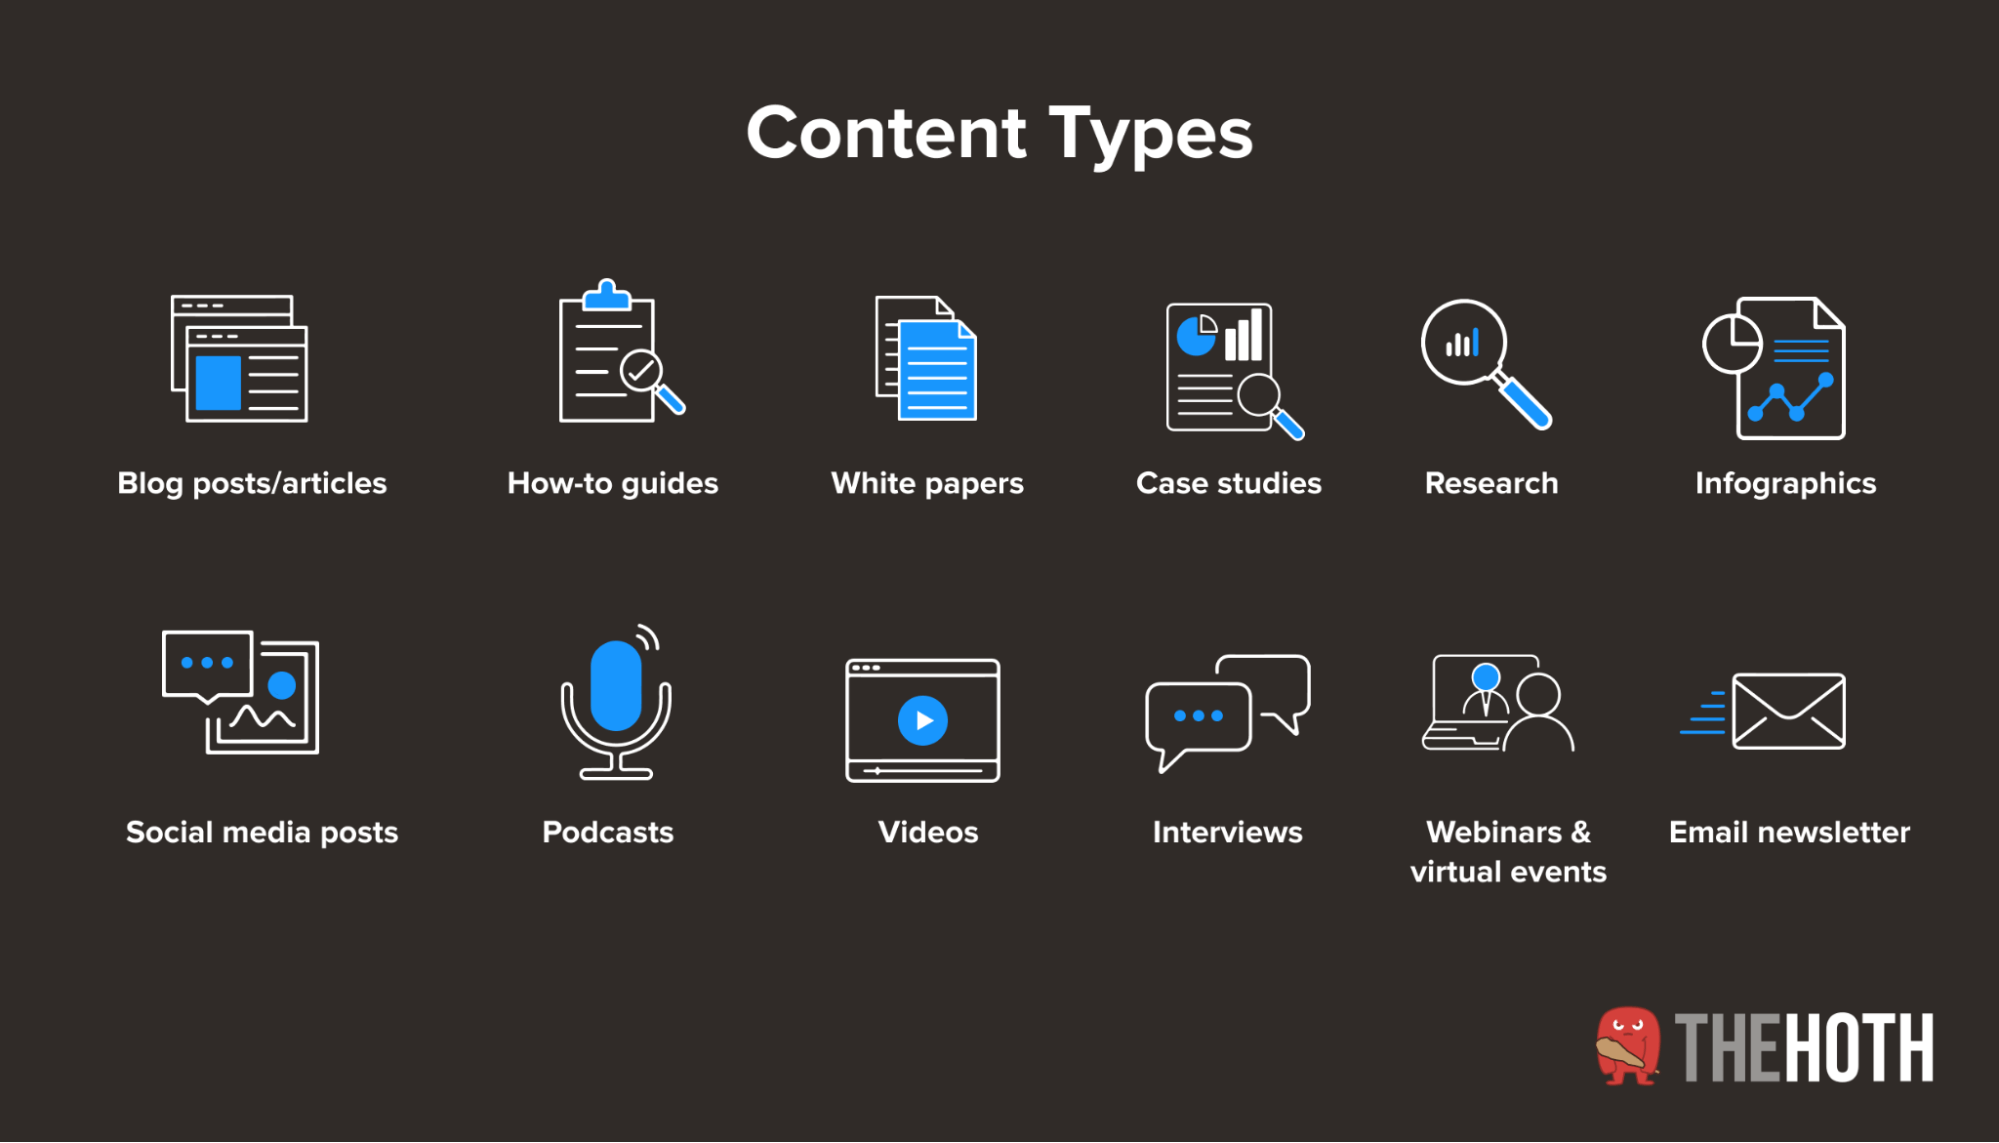 Types of content you can implement and experiment with